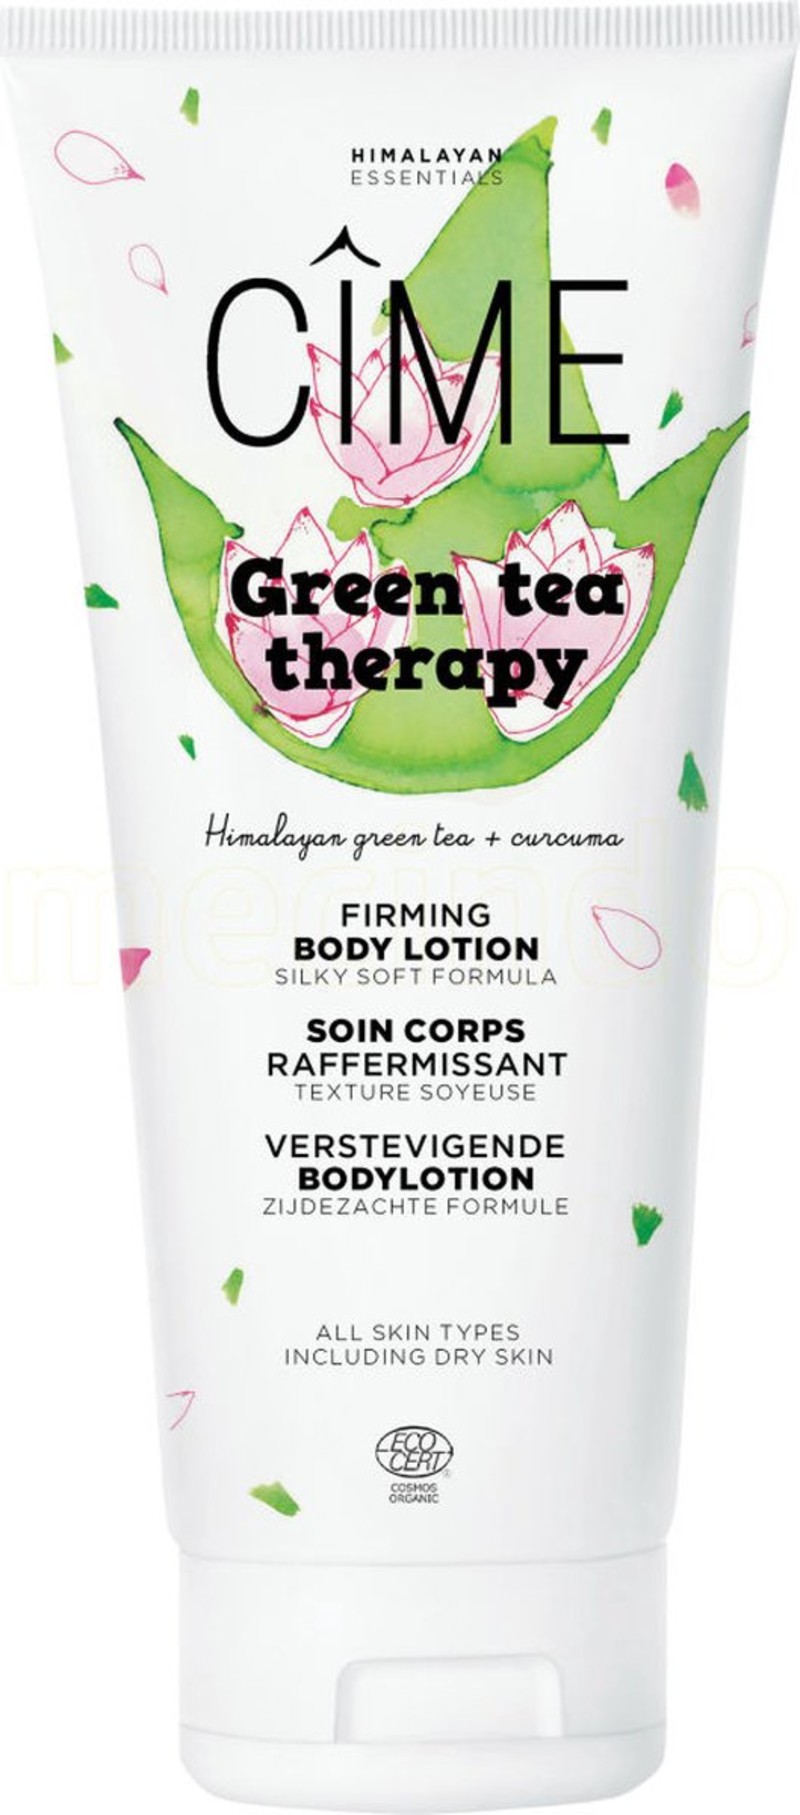 Cime -  Groene thee therapie - Verstevigende bodylotion - 200ml - Green tea Therapy - Body Lotion